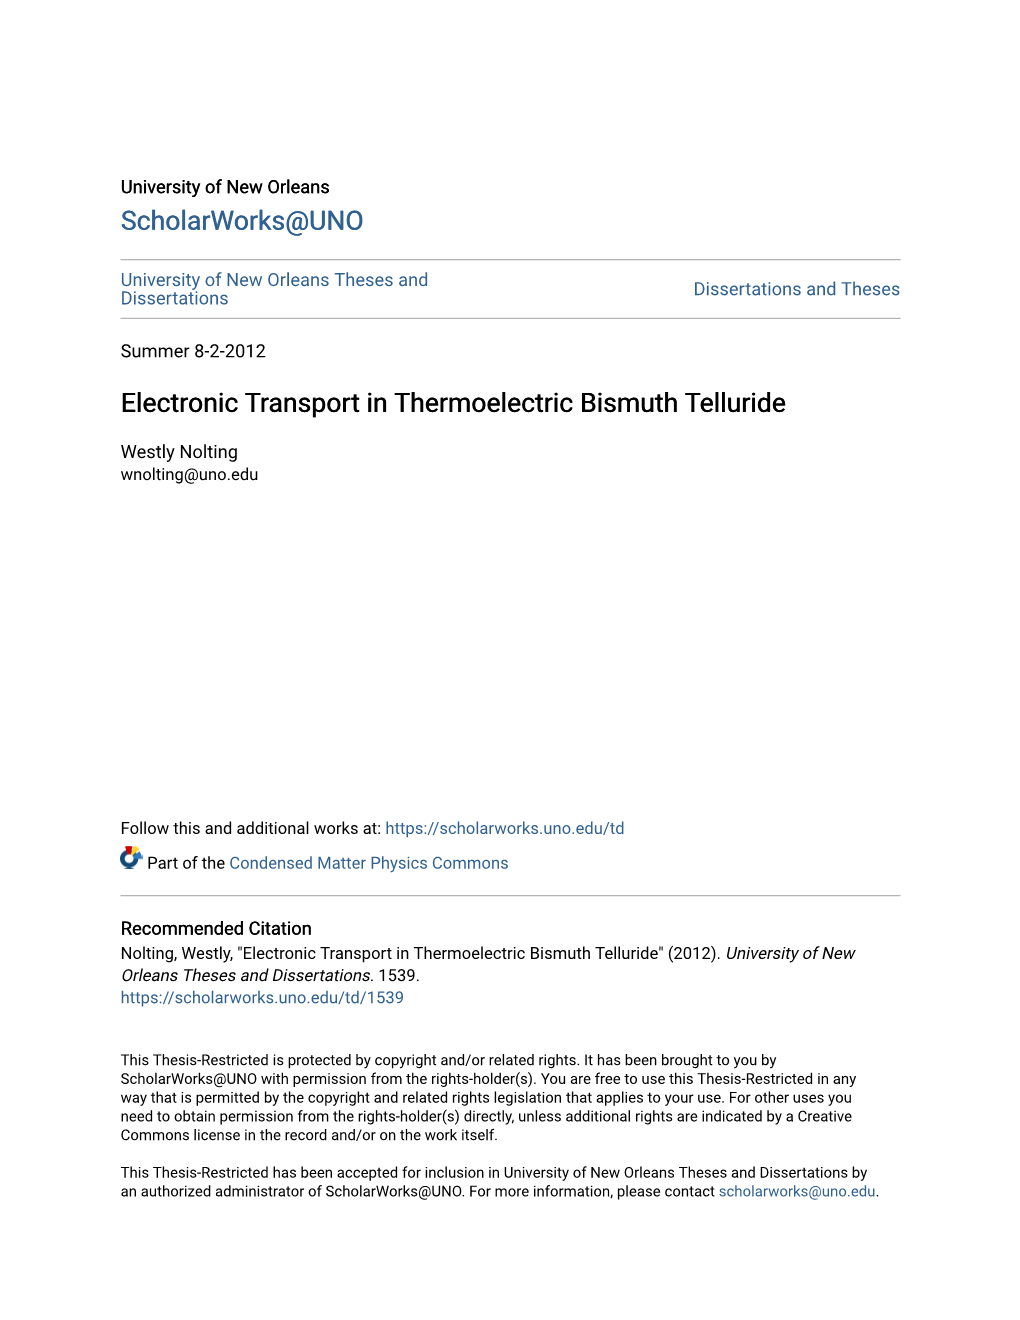 Electronic Transport in Thermoelectric Bismuth Telluride